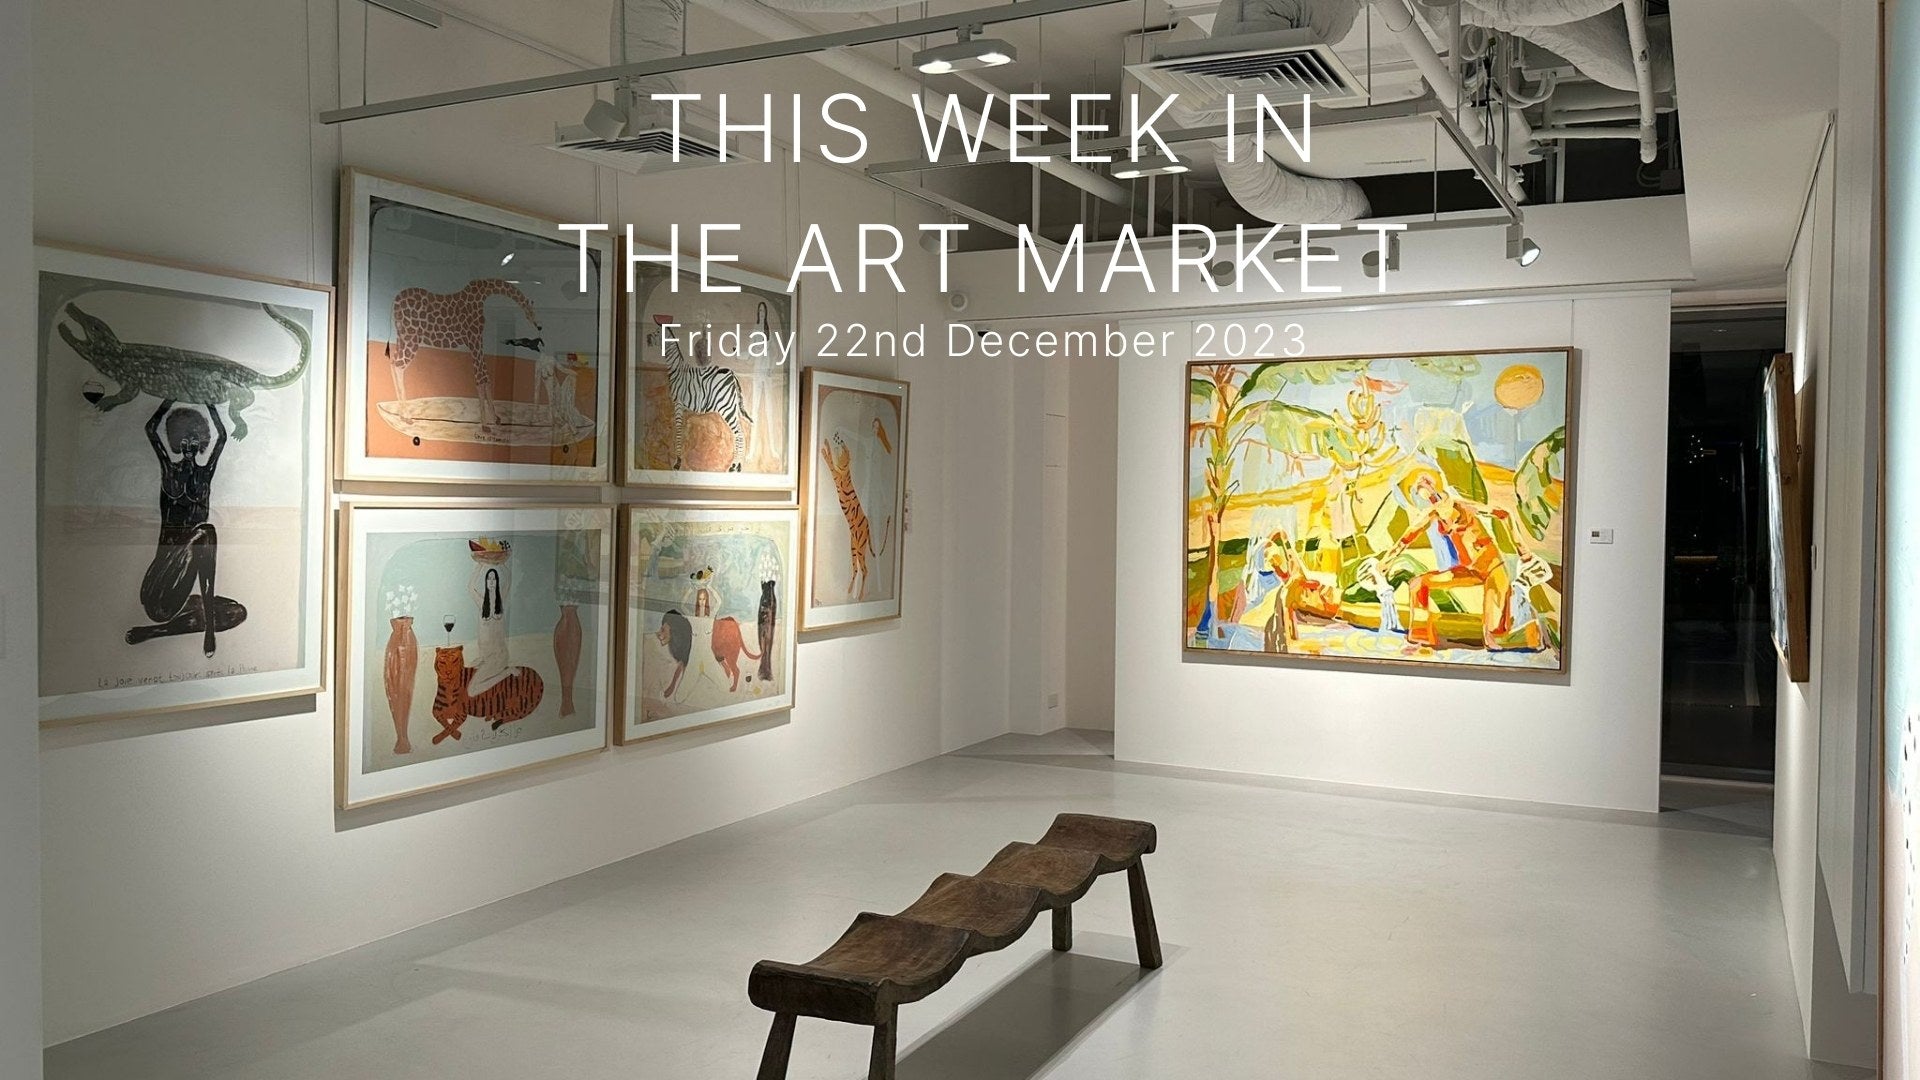 This Week in the Art Market – Friday 22nd December 2023